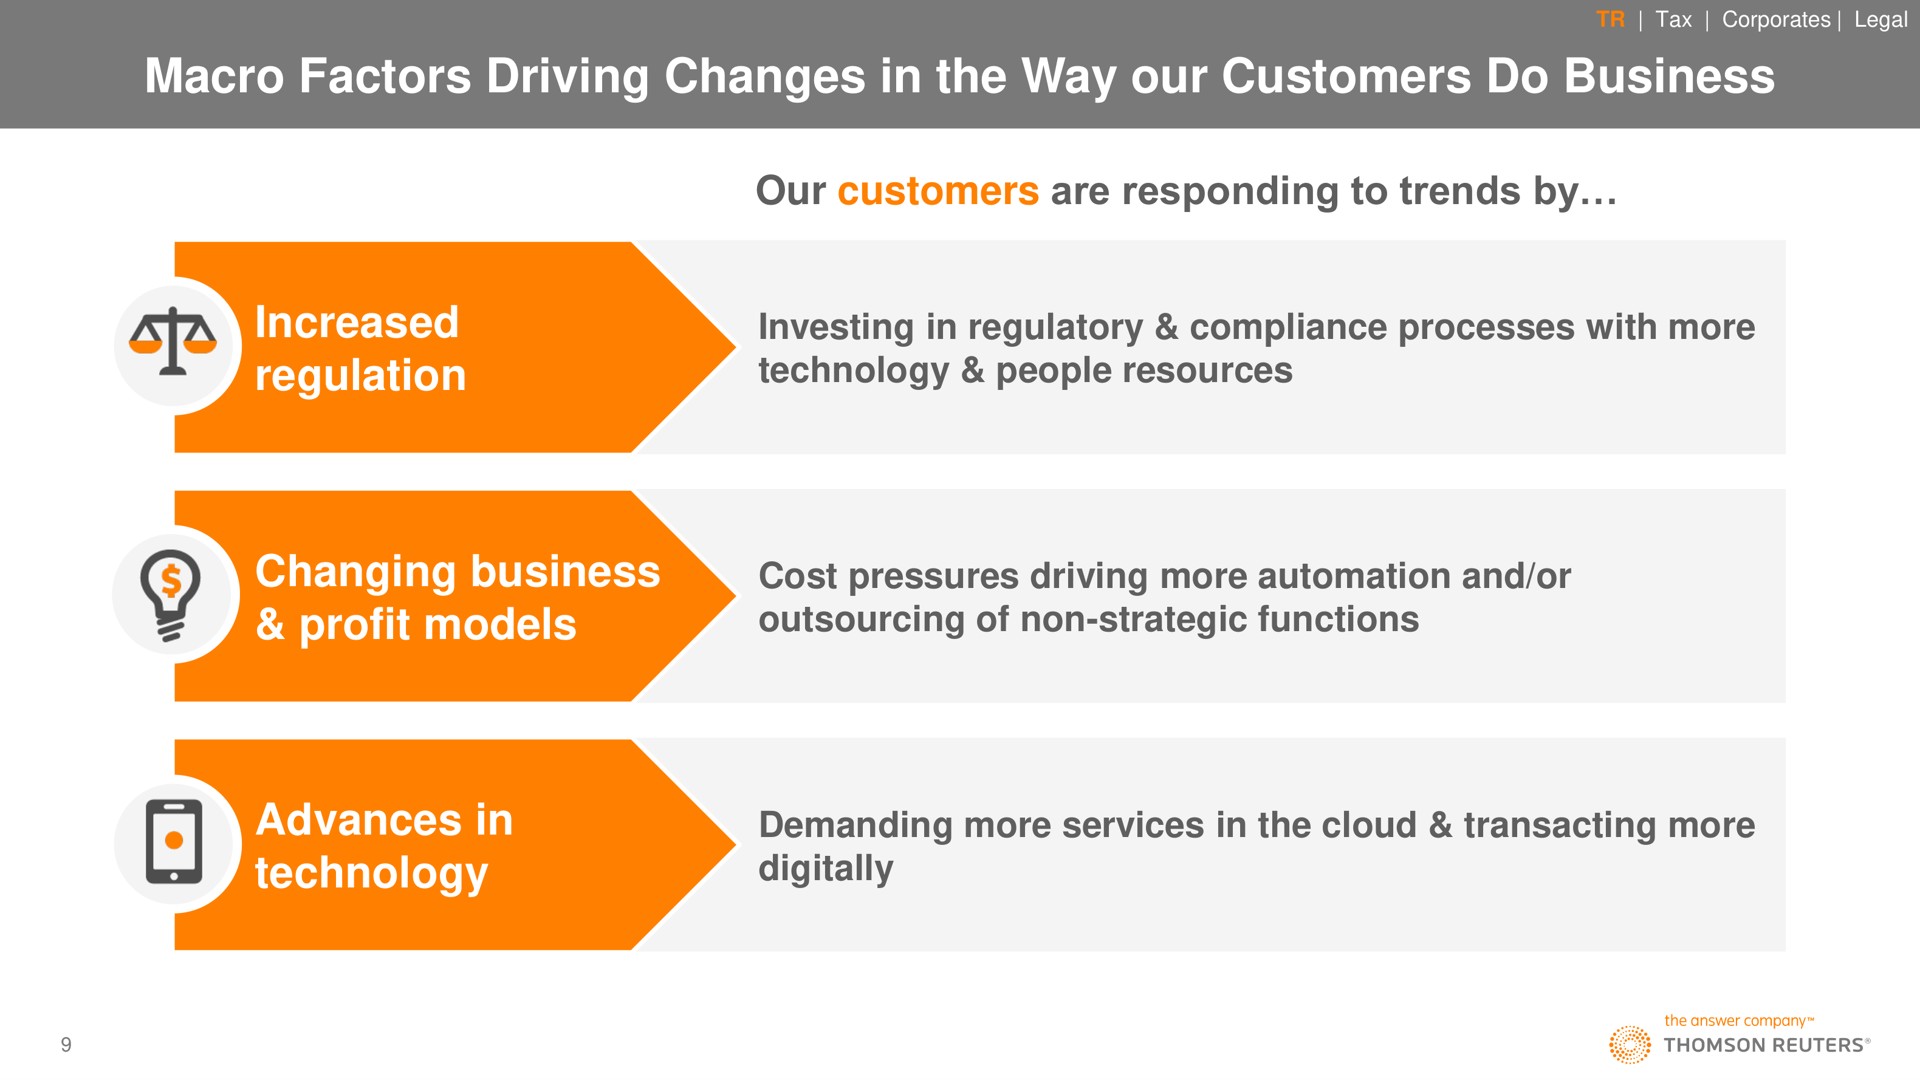 macro factors driving changes in the way our customers do business our customers are responding to trends by increased regulation changing business profit models advances in technology demanding more services cloud transacting more digitally | Thomson Reuters